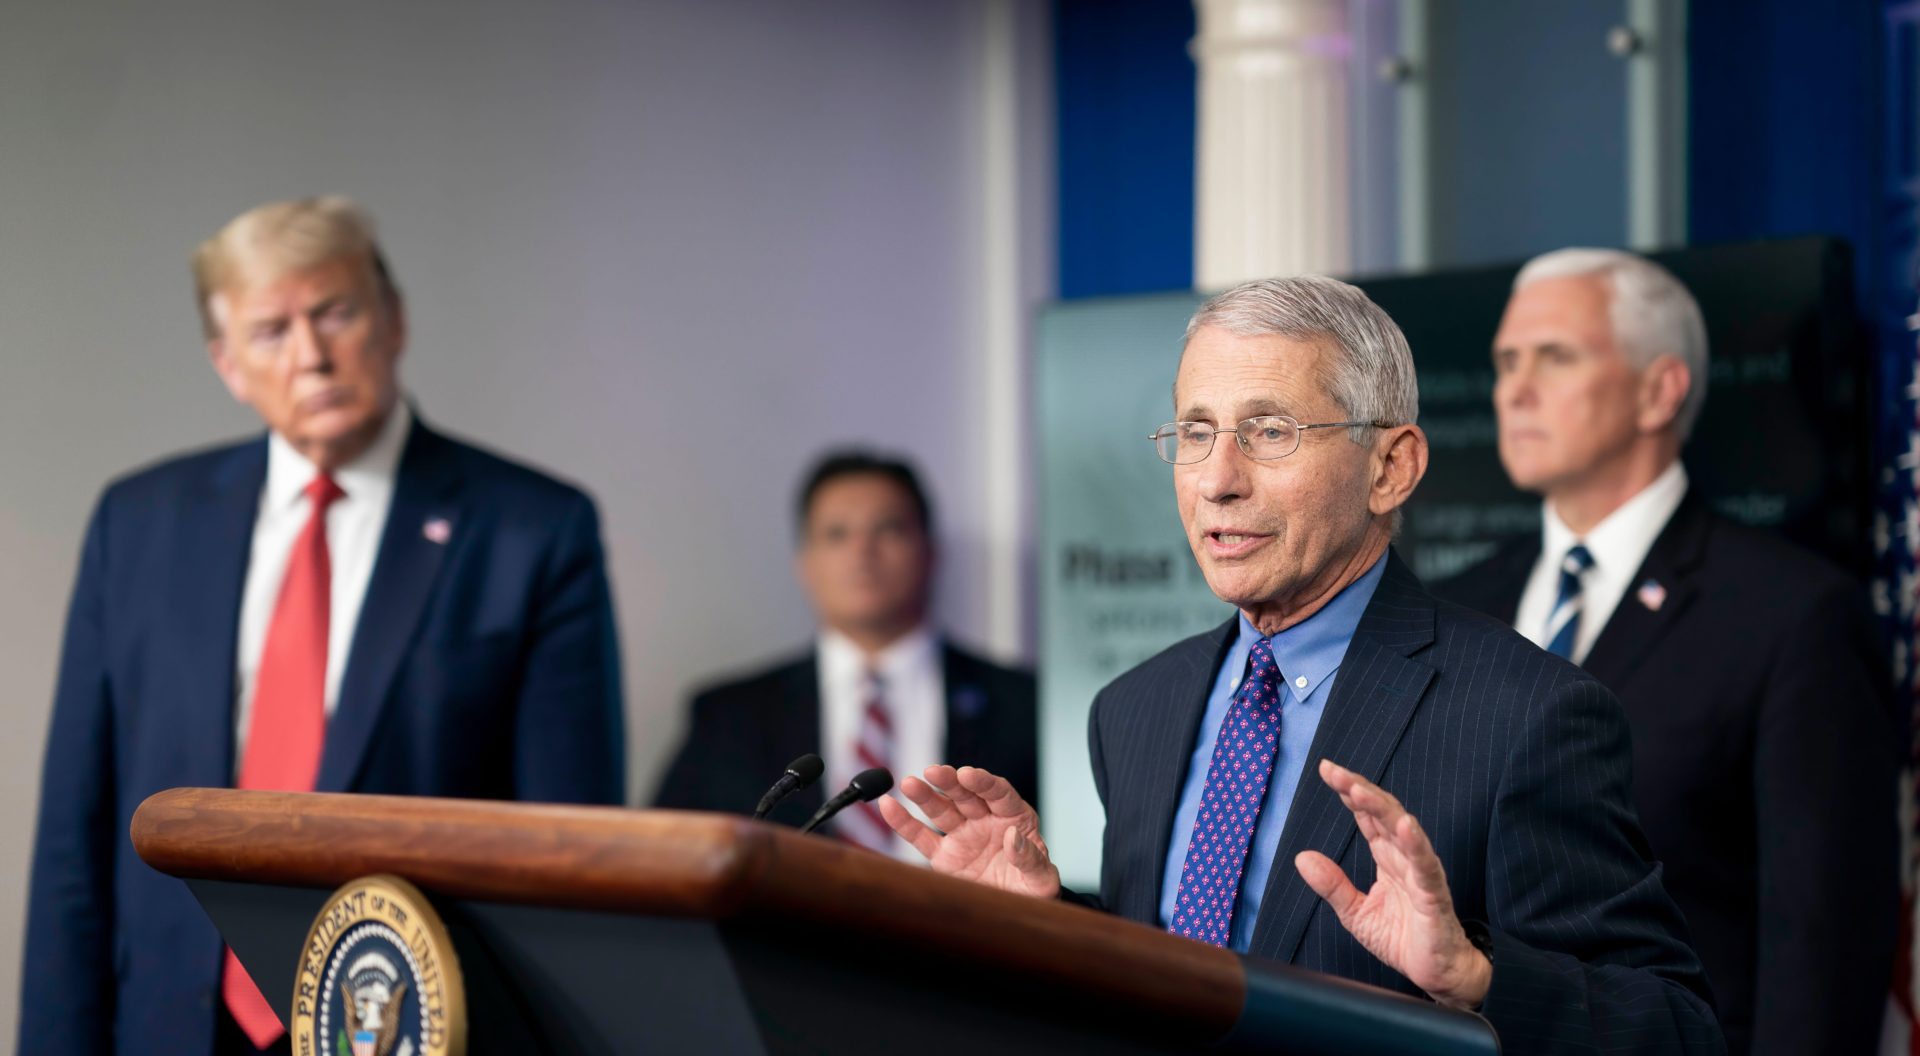 Anthony Fauci: ‘We must be perpetually prepared for future pandemics’